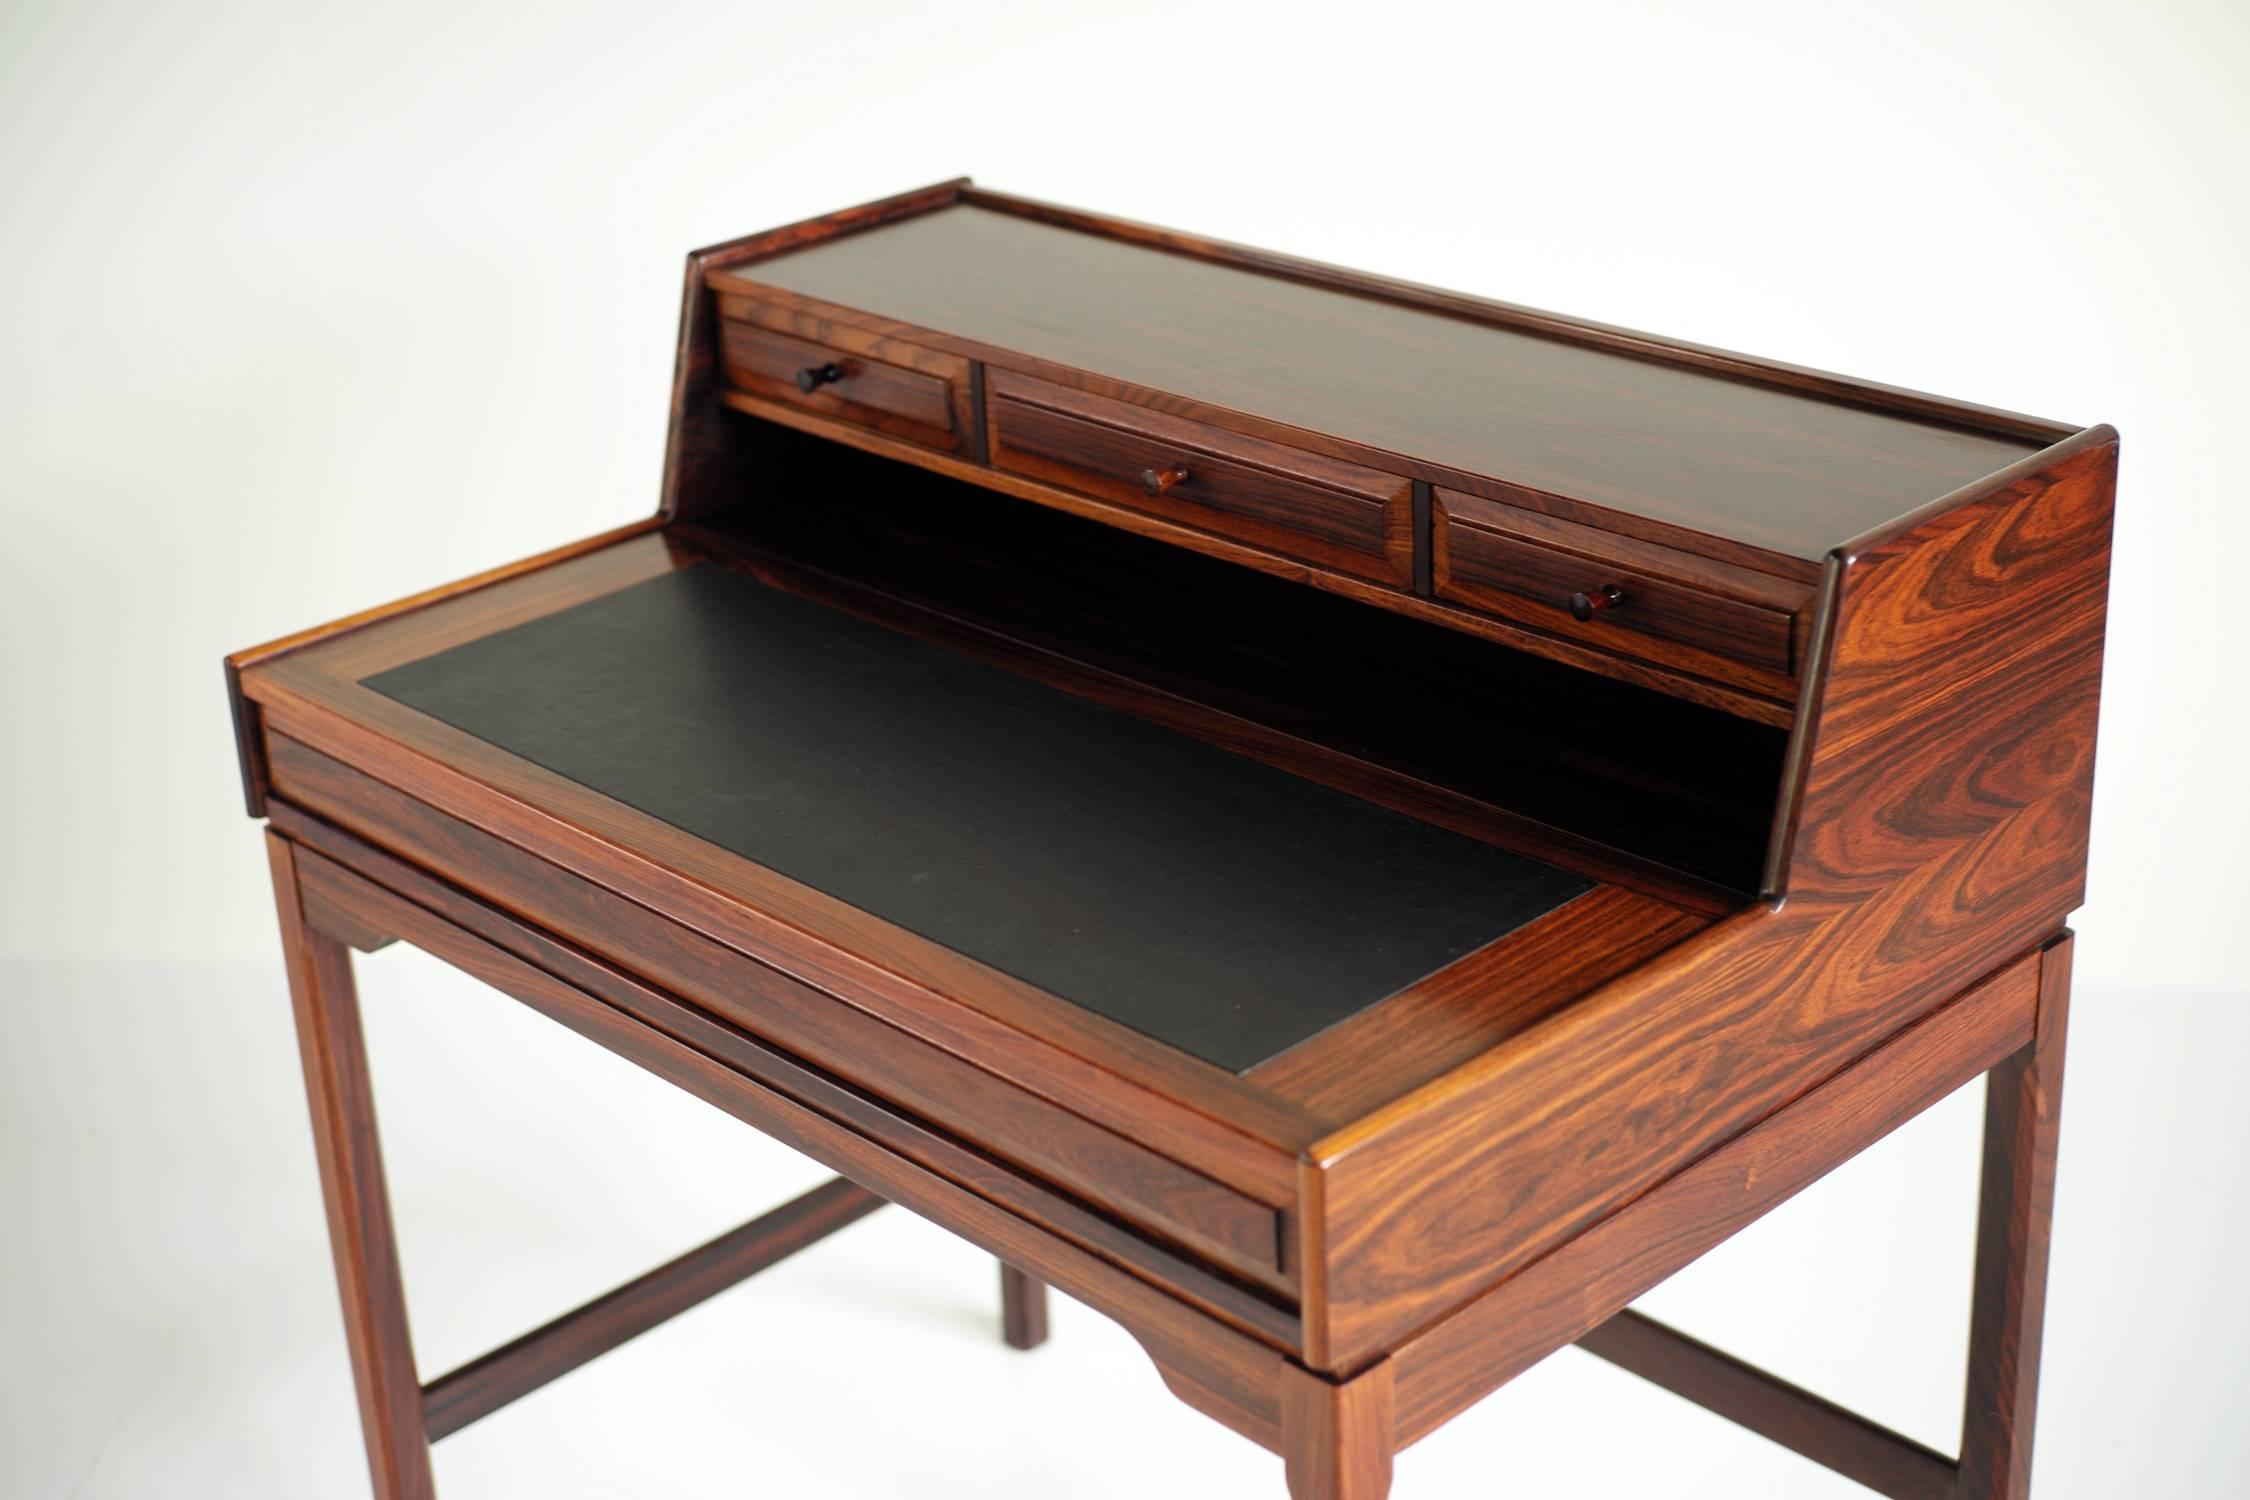 Refined in its smallest detail, this rare rosewood secretary is the work of Torbjørn Afdal for Bruksbo, Norway, 1960.
The flap tray is covered with black leather and reveals two compartments, three drawers are placed on the top panel.
Very good